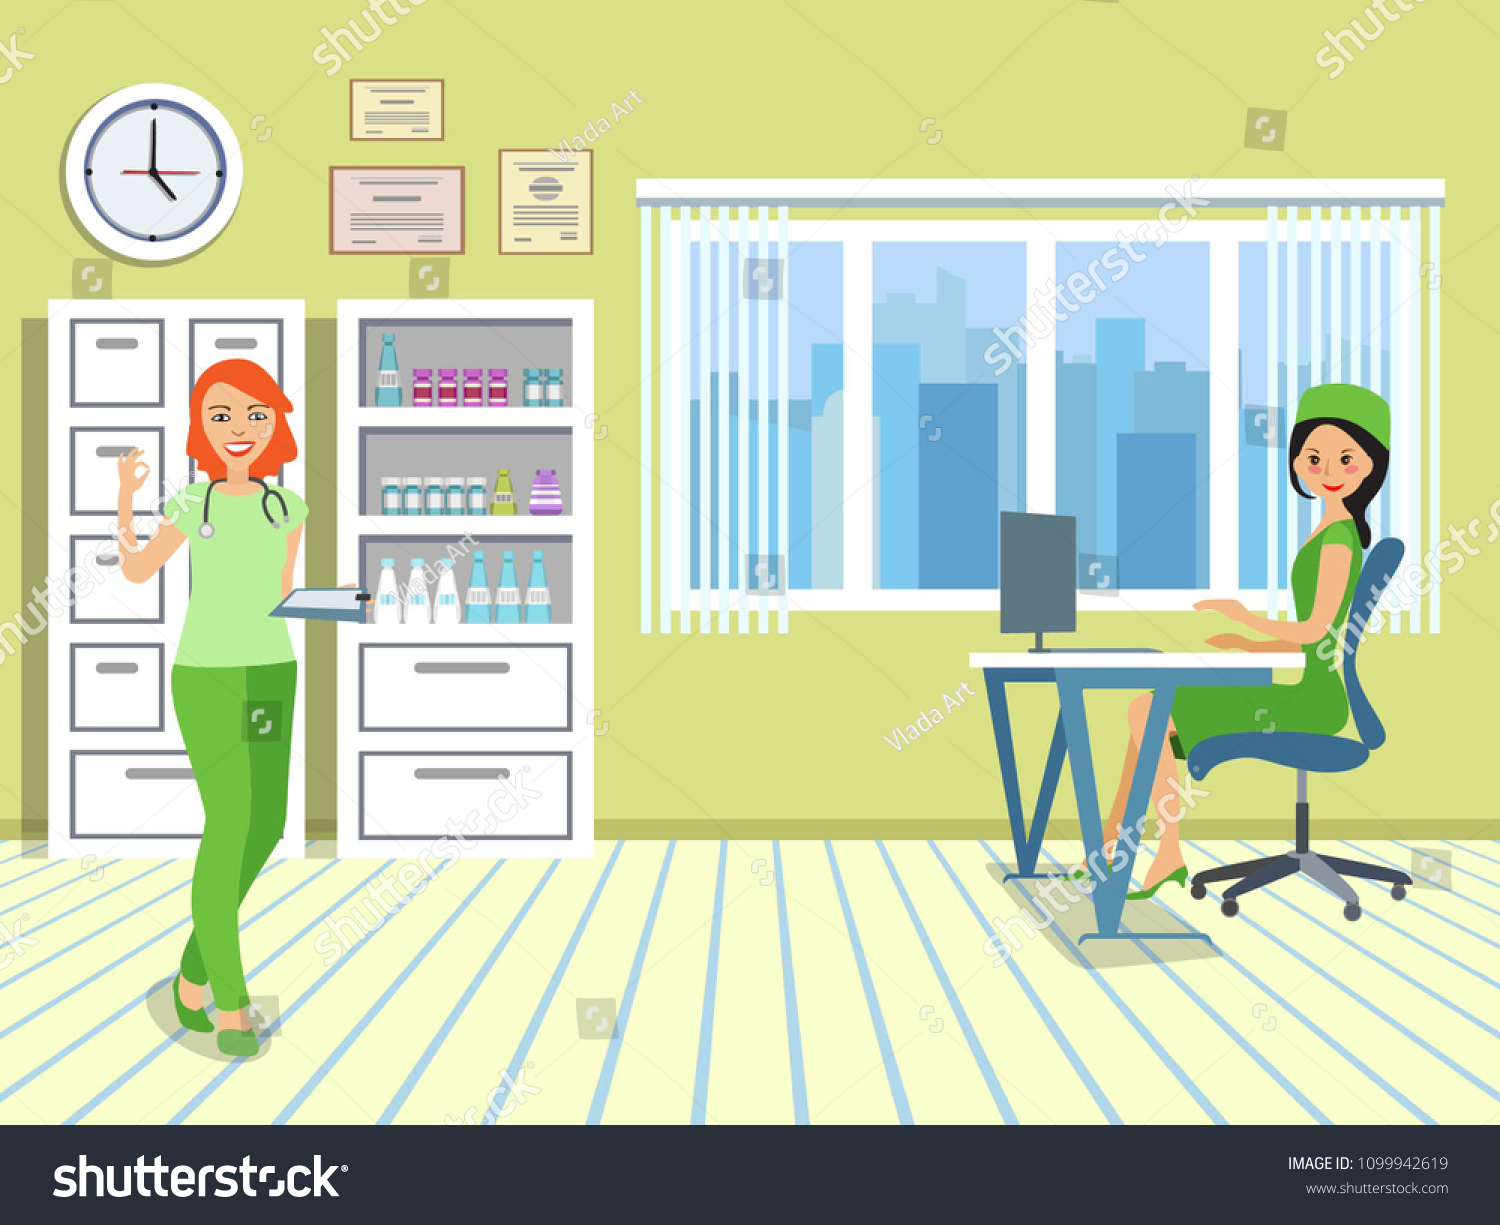 Doctor Medical Office Window Jalousie Cabinets Stock Vector